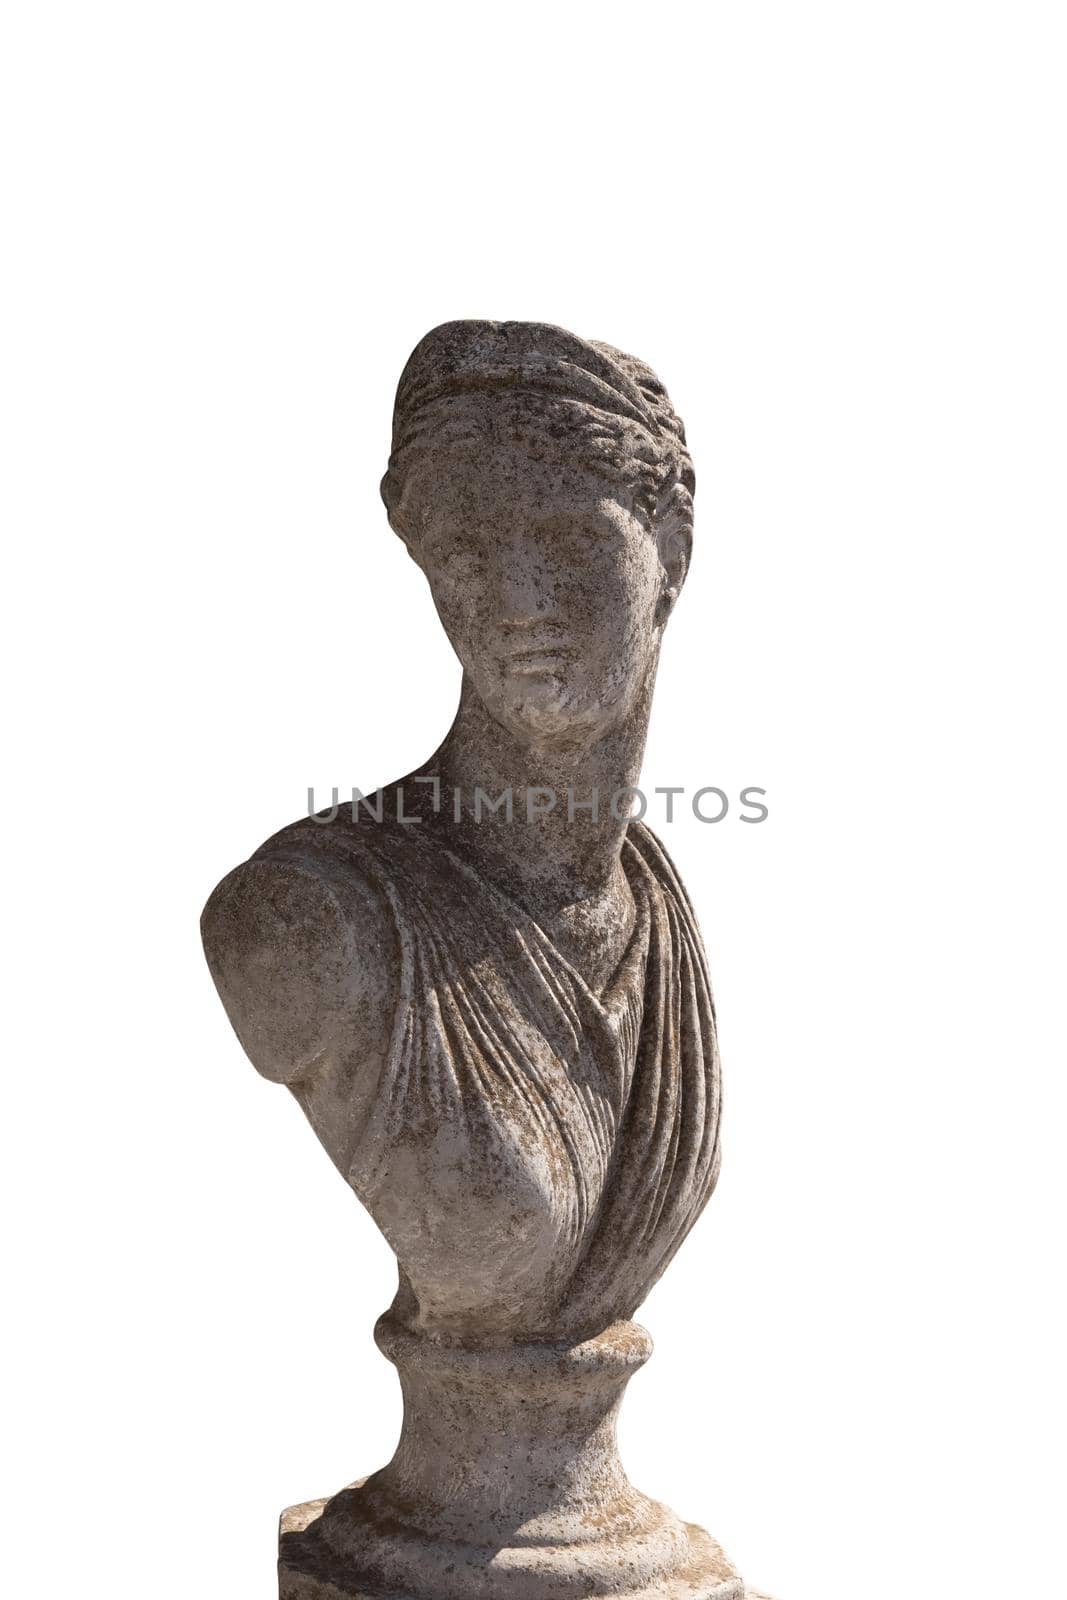 Close up of ancient stone sculpture of woman's bust on white background. art and classical style romantic figurative stone sculpture.